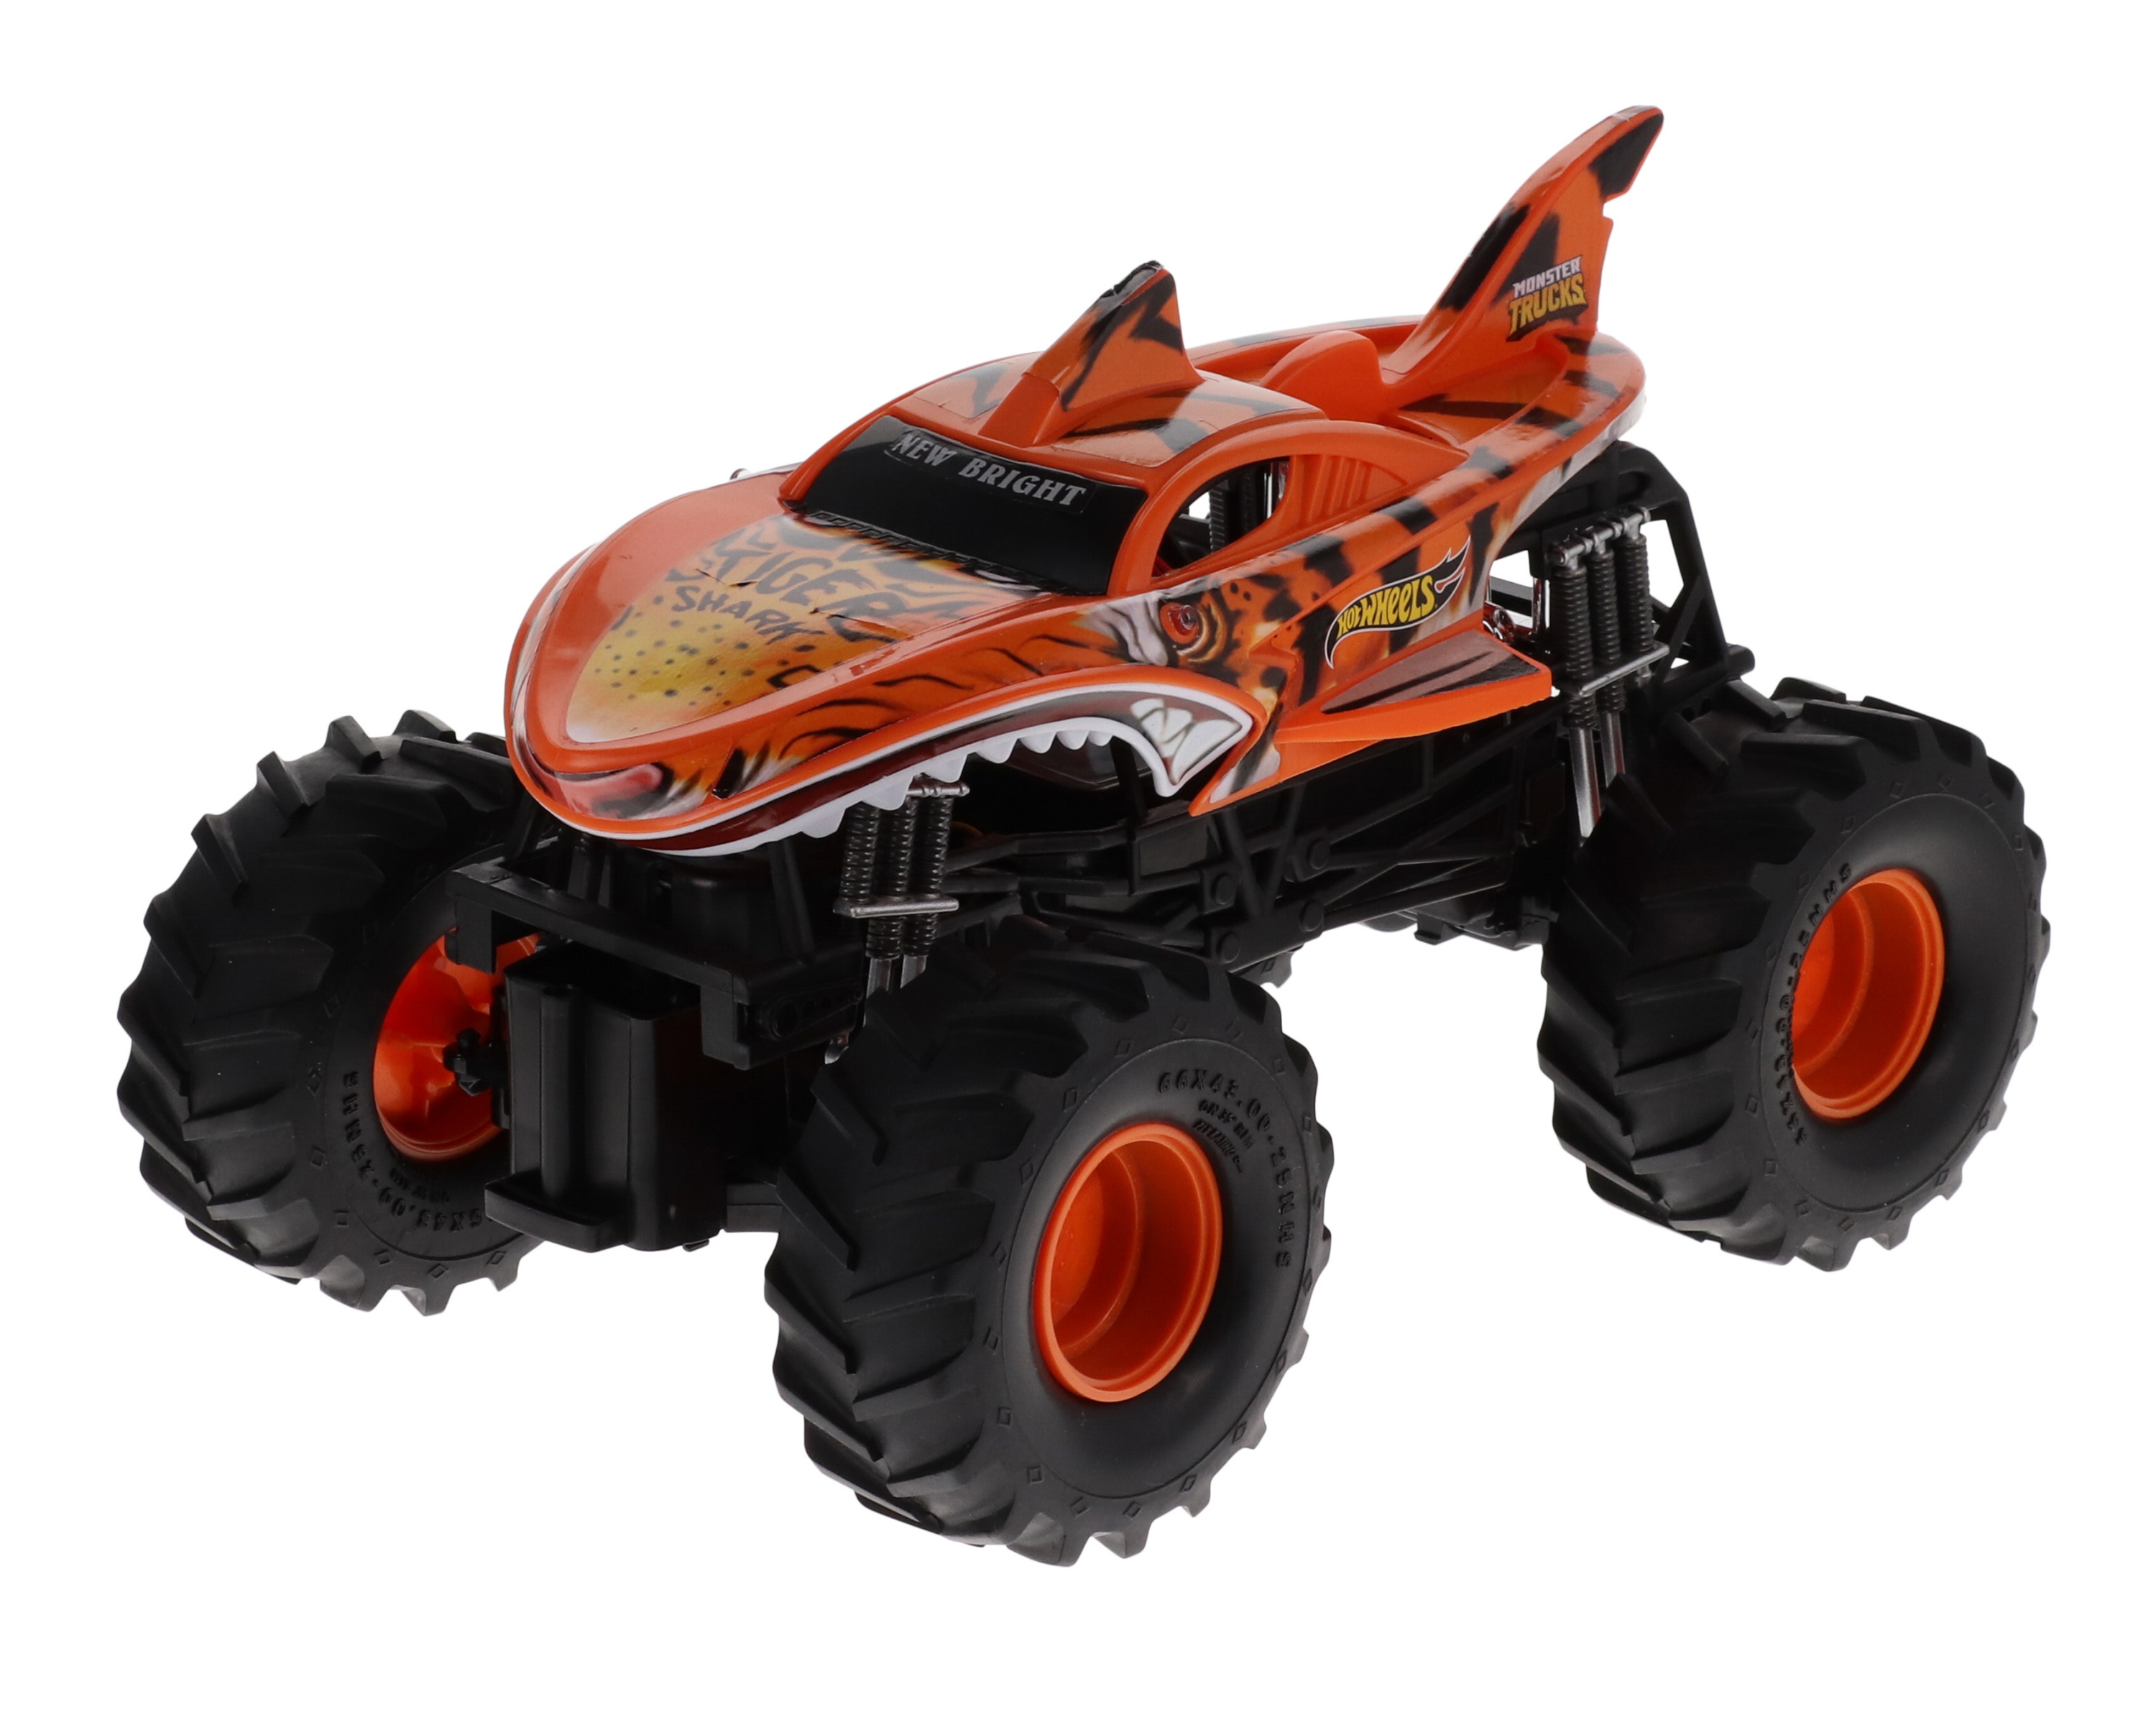 New Bright 1:14 Scale Radio Controlled Hot Wheels Tiger Shark Monster Truck  2.4GHz USB